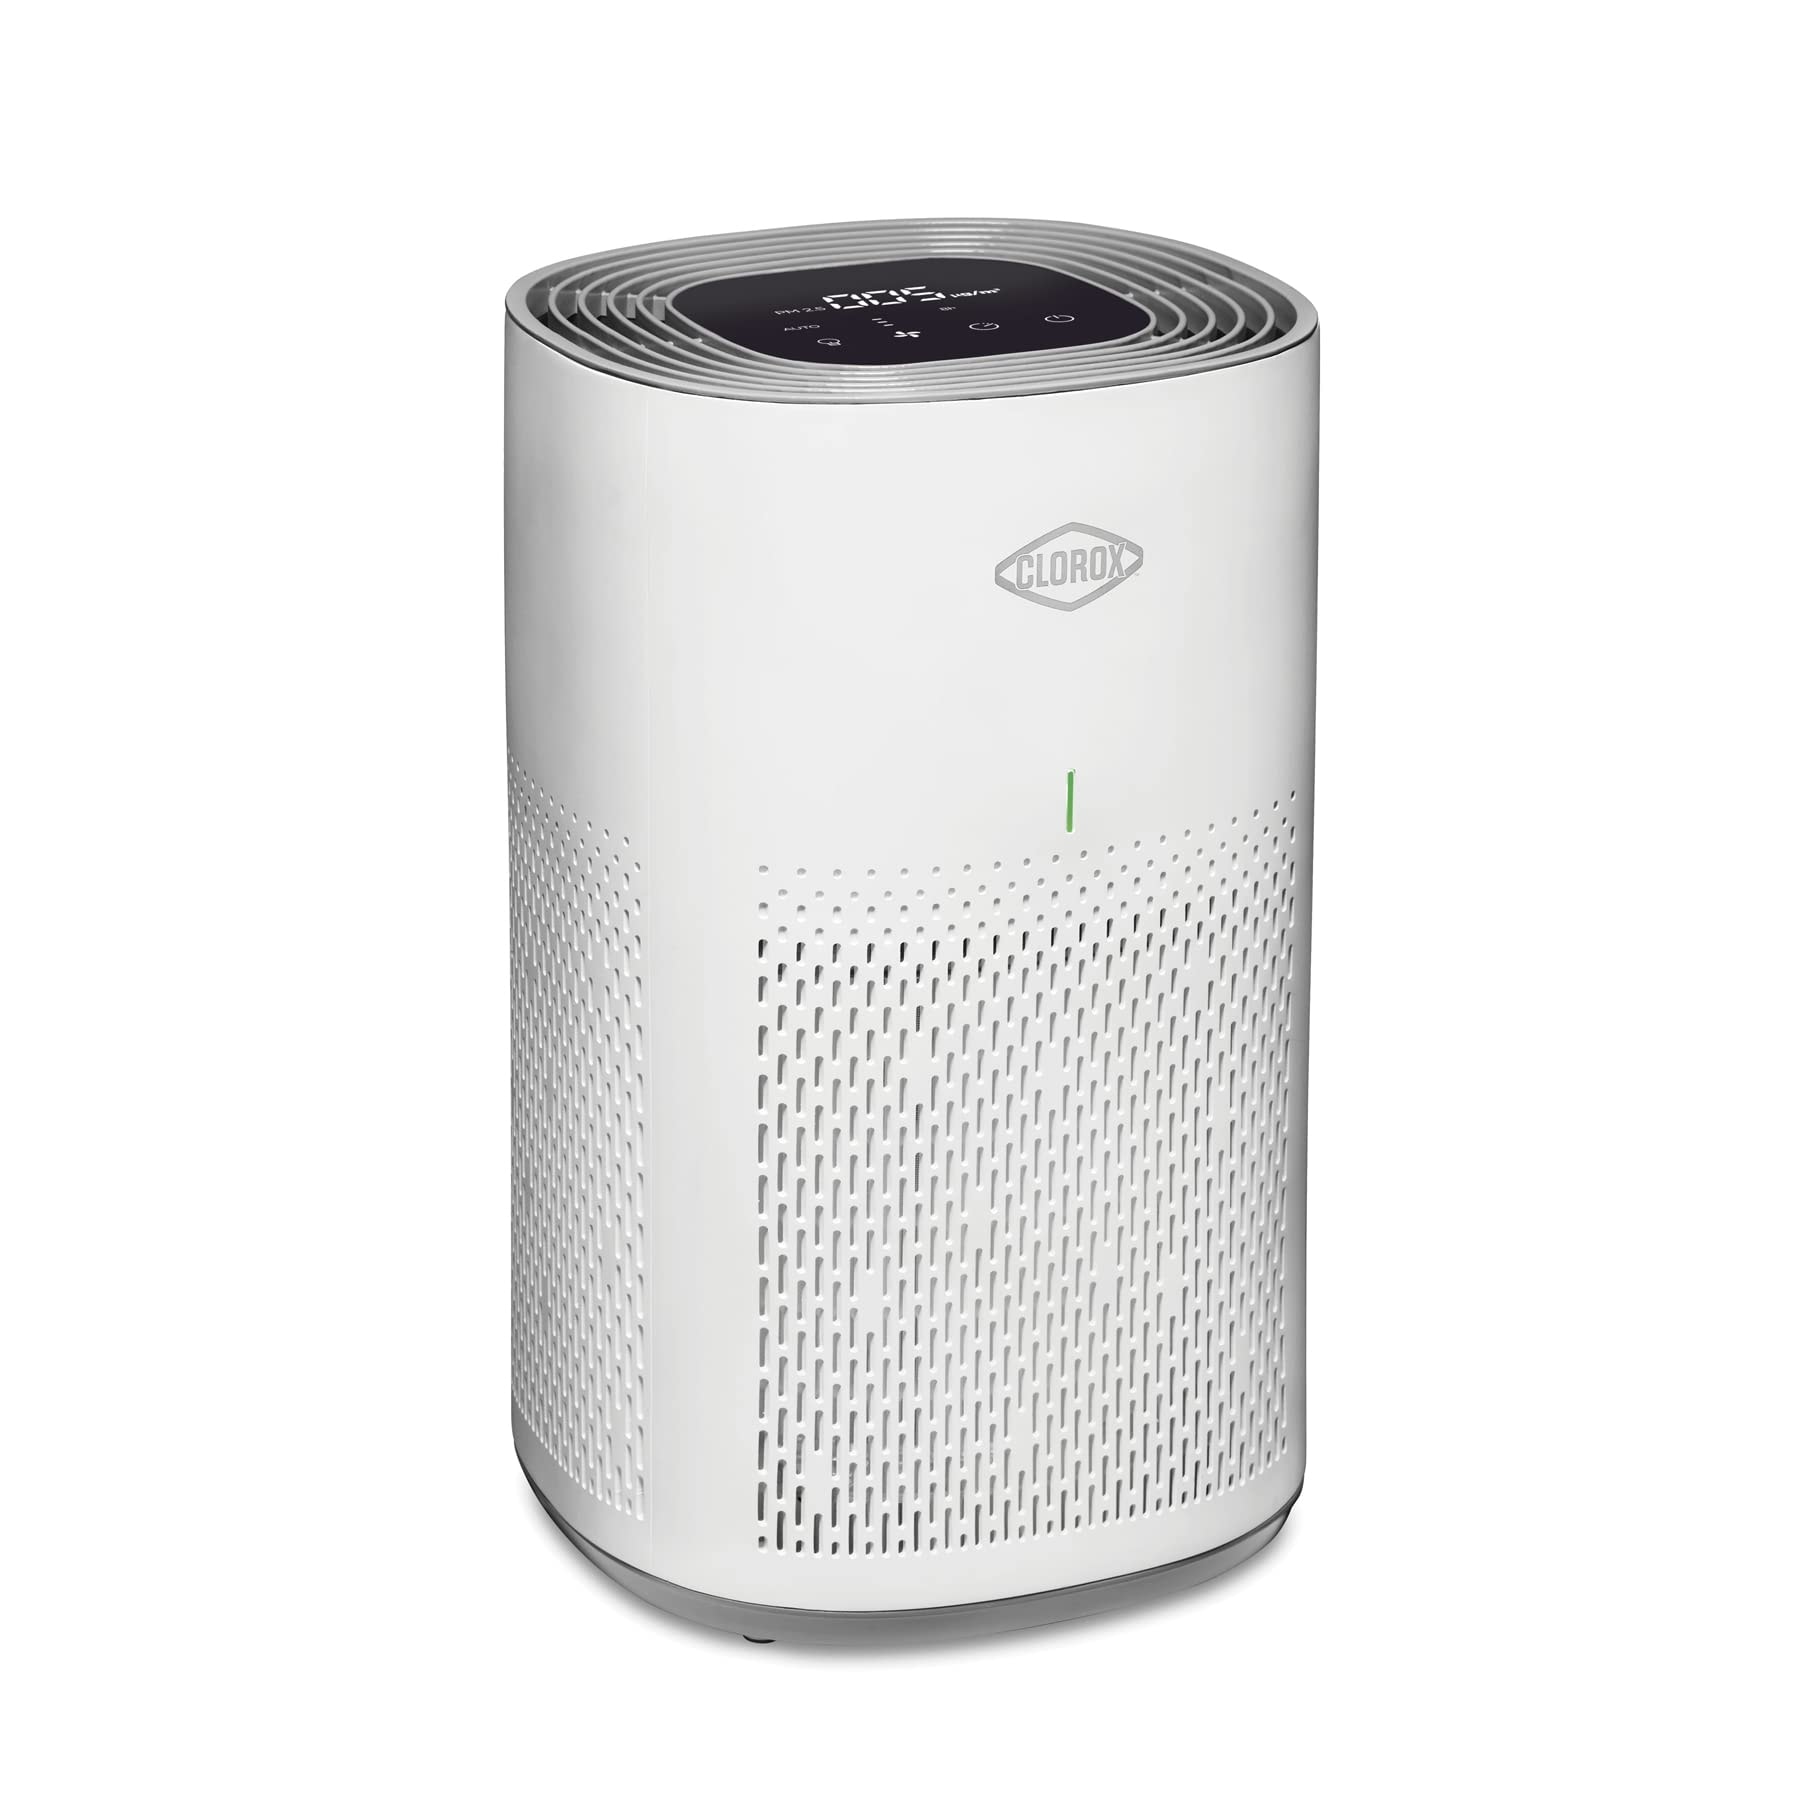 Air Purifiers for Home, True HEPA Filter, Medium Rooms Up to 1,000 Sq Ft, Removes 99.9% of Mold, Viruses, Wildfire Smoke